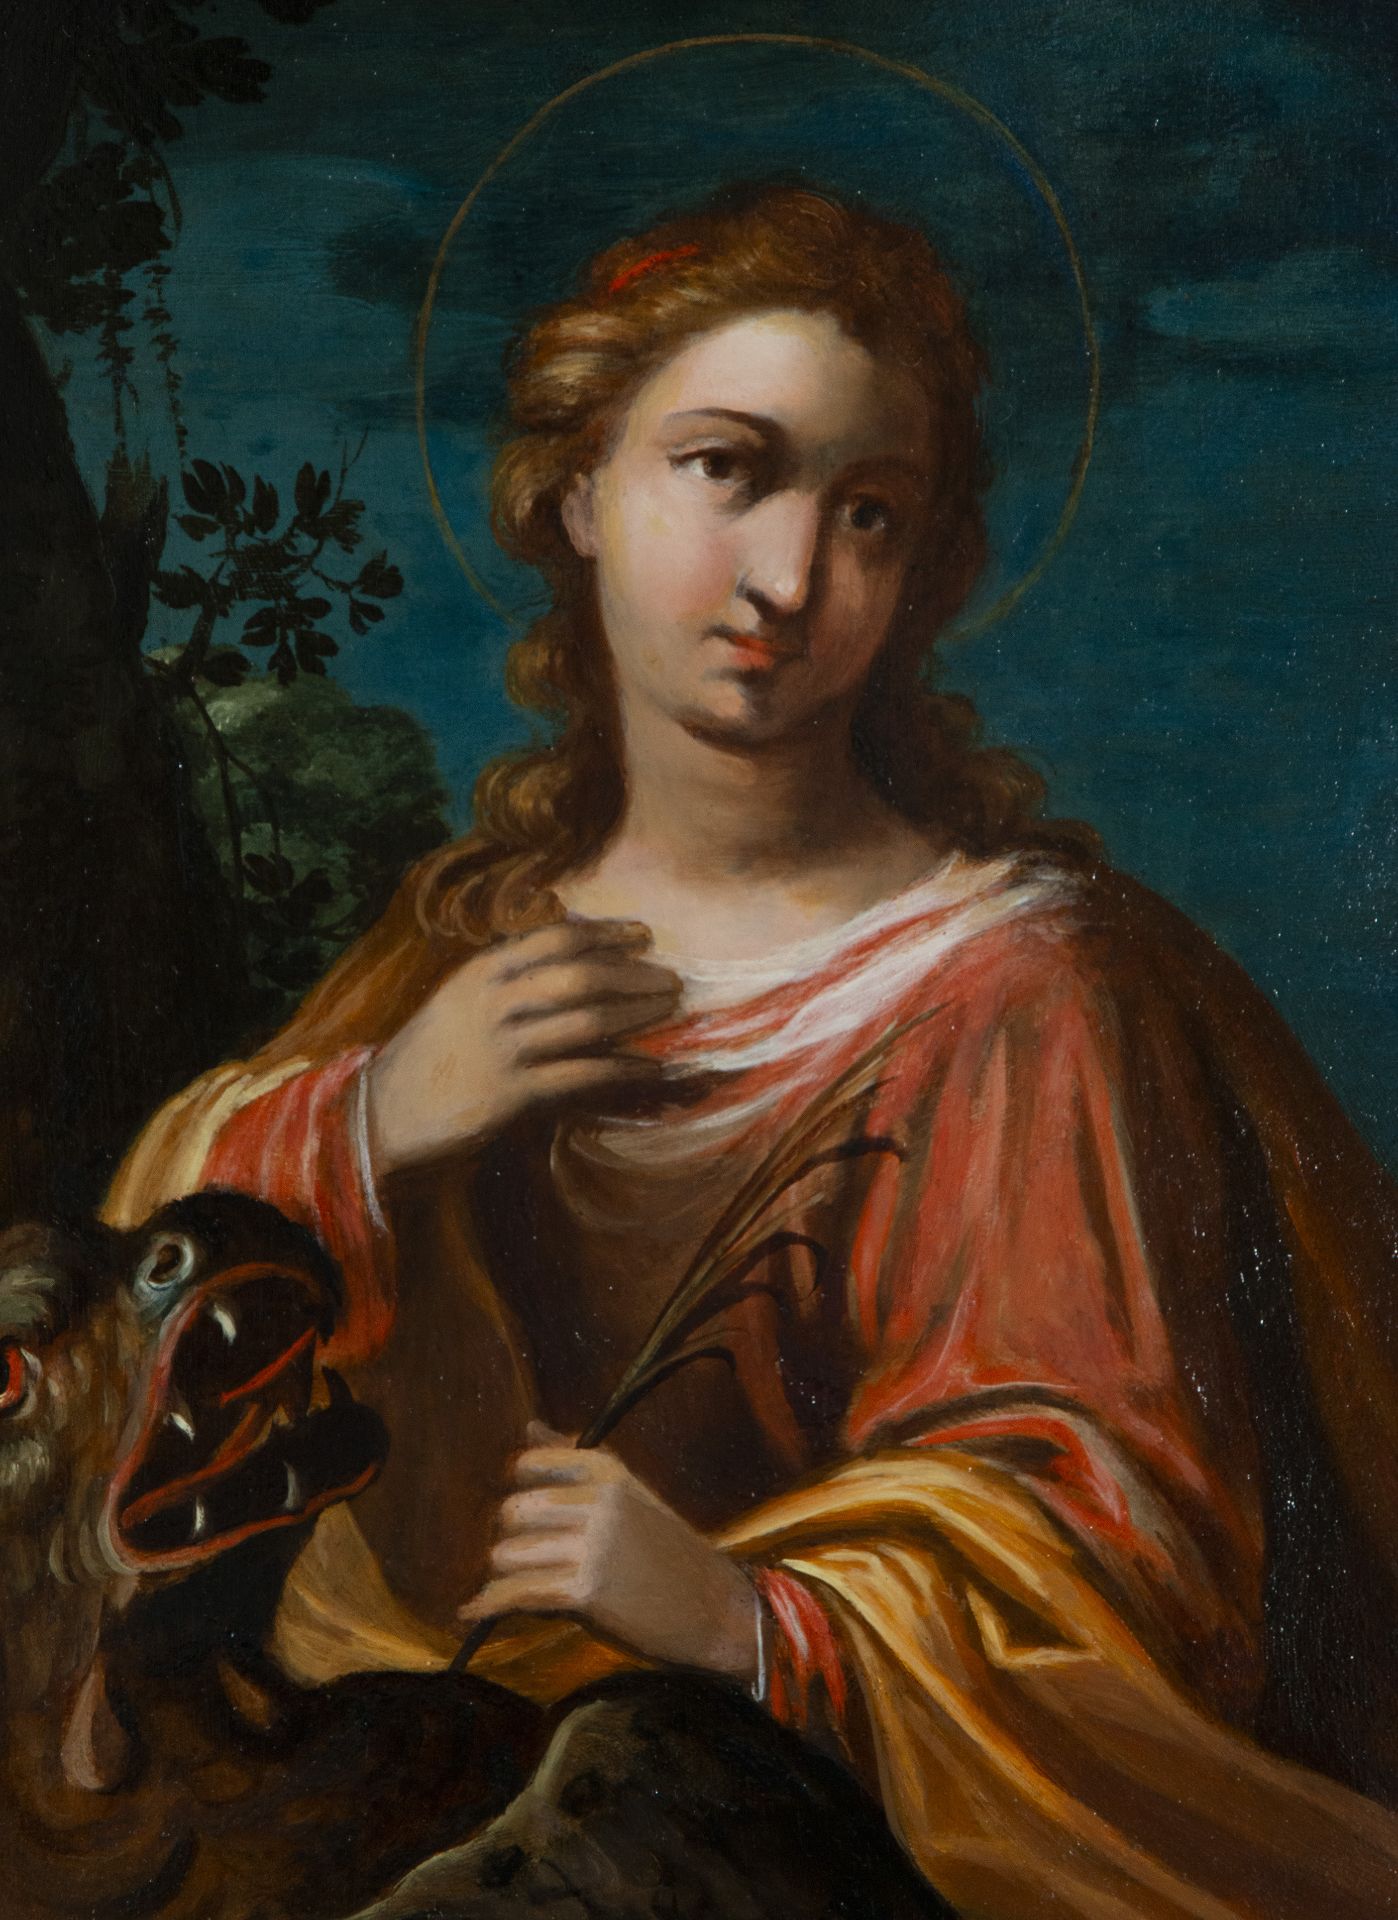 Saint Margaret of Antioch on copper. Flemish or Italian school of the 17th century - Image 2 of 4